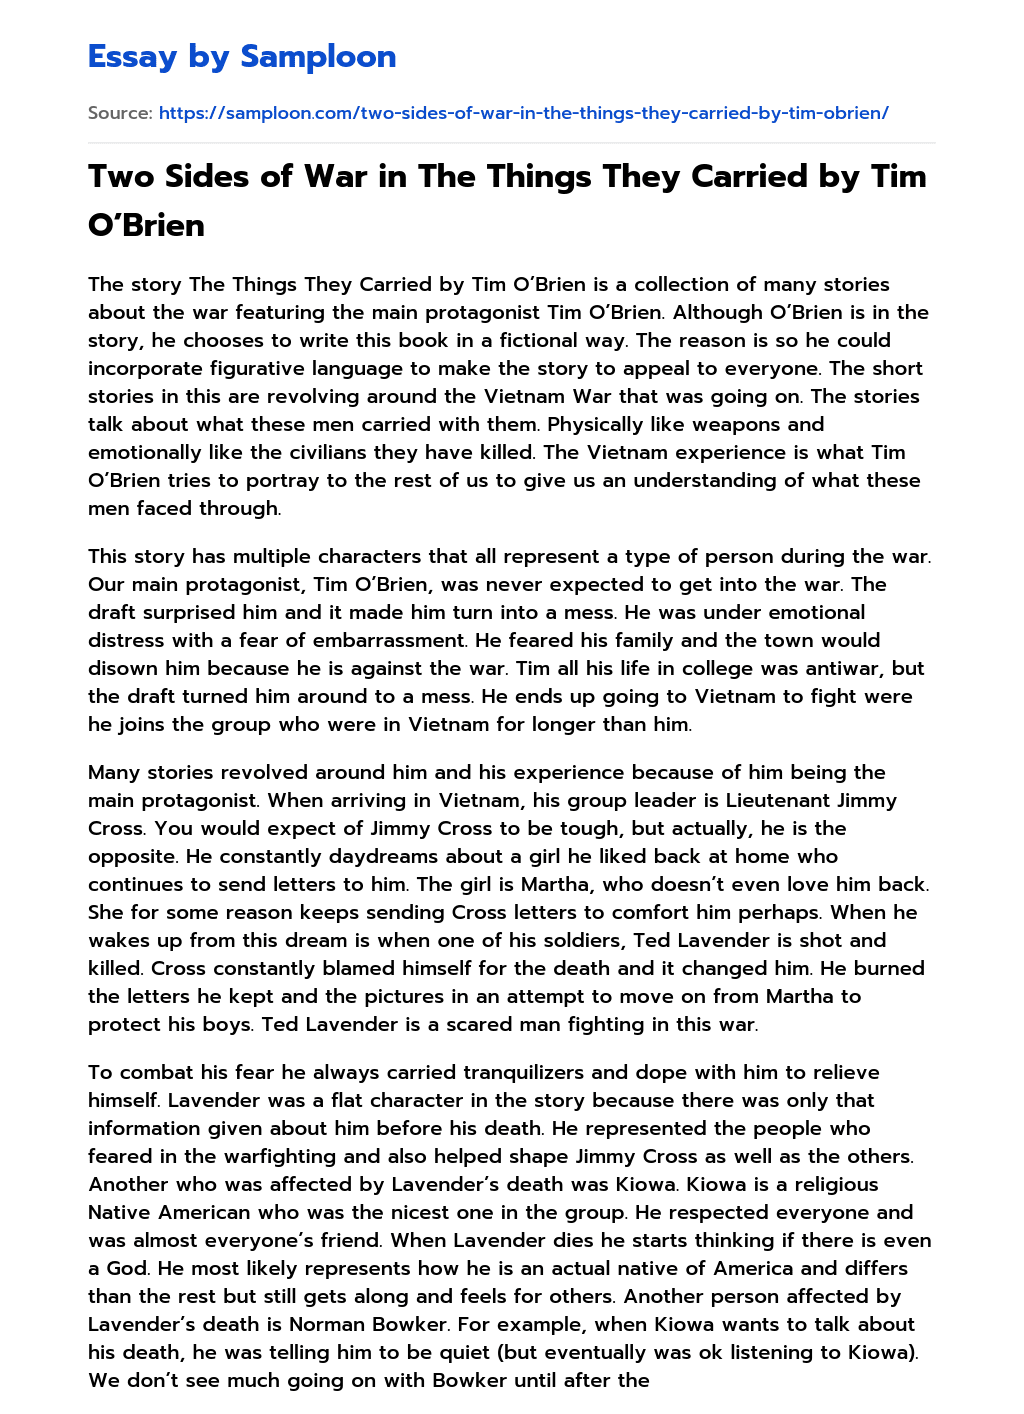 Two Sides of War in The Things They Carried by Tim O’Brien essay